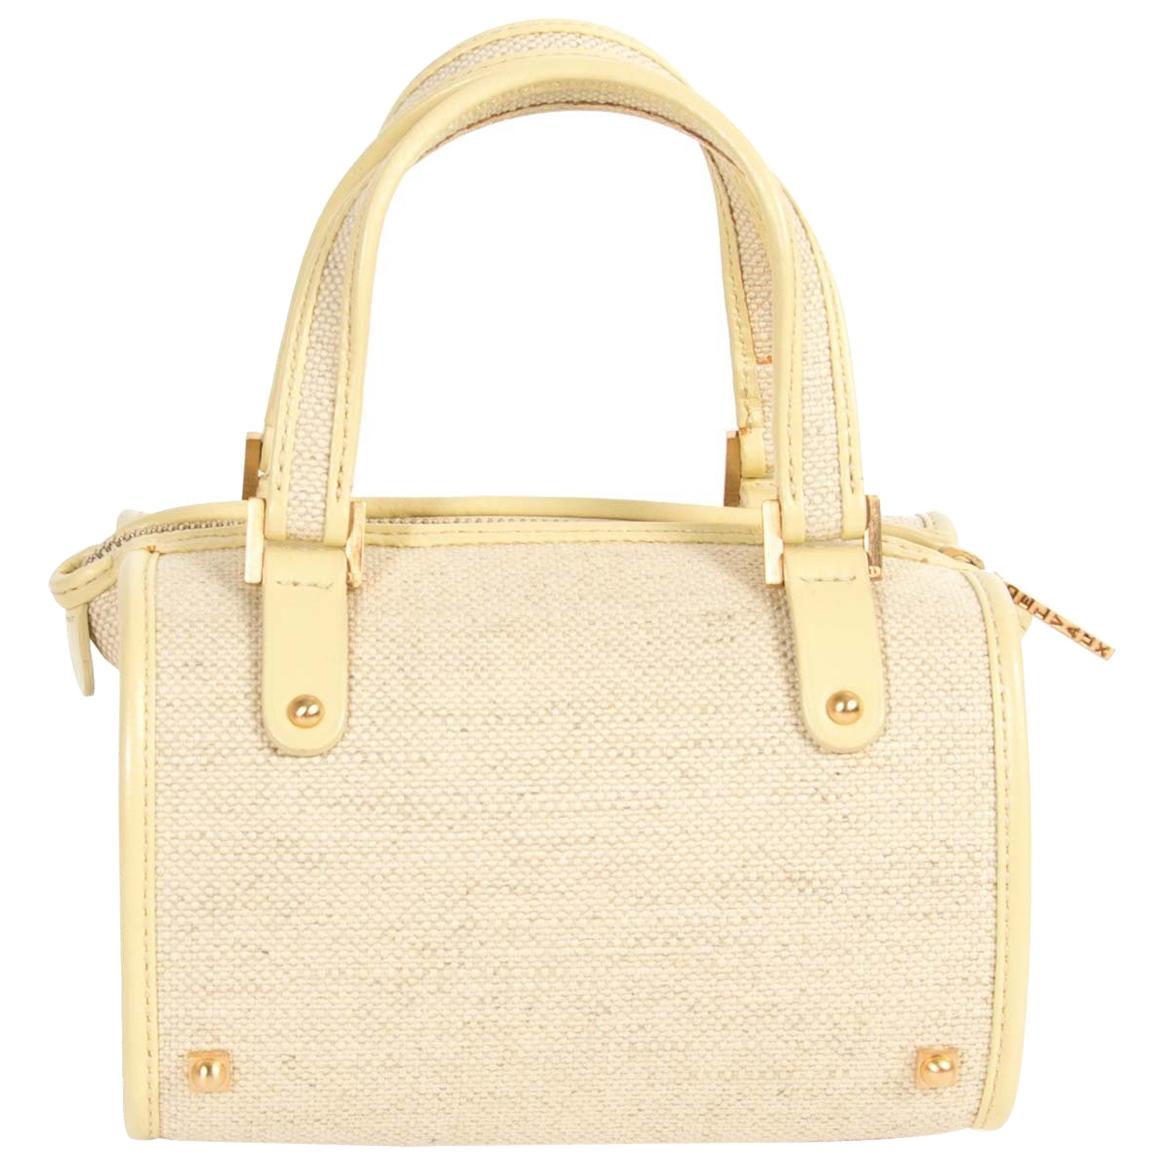 Excellent condition

Delvaux Le Astrid Mini Toile Vanille Evening Bag

What a gem! This gorgeous Delvaux Le Astrid is the perfect company for all your holiday parties and evening adventures! This mini bag is spacious enough to hold all your